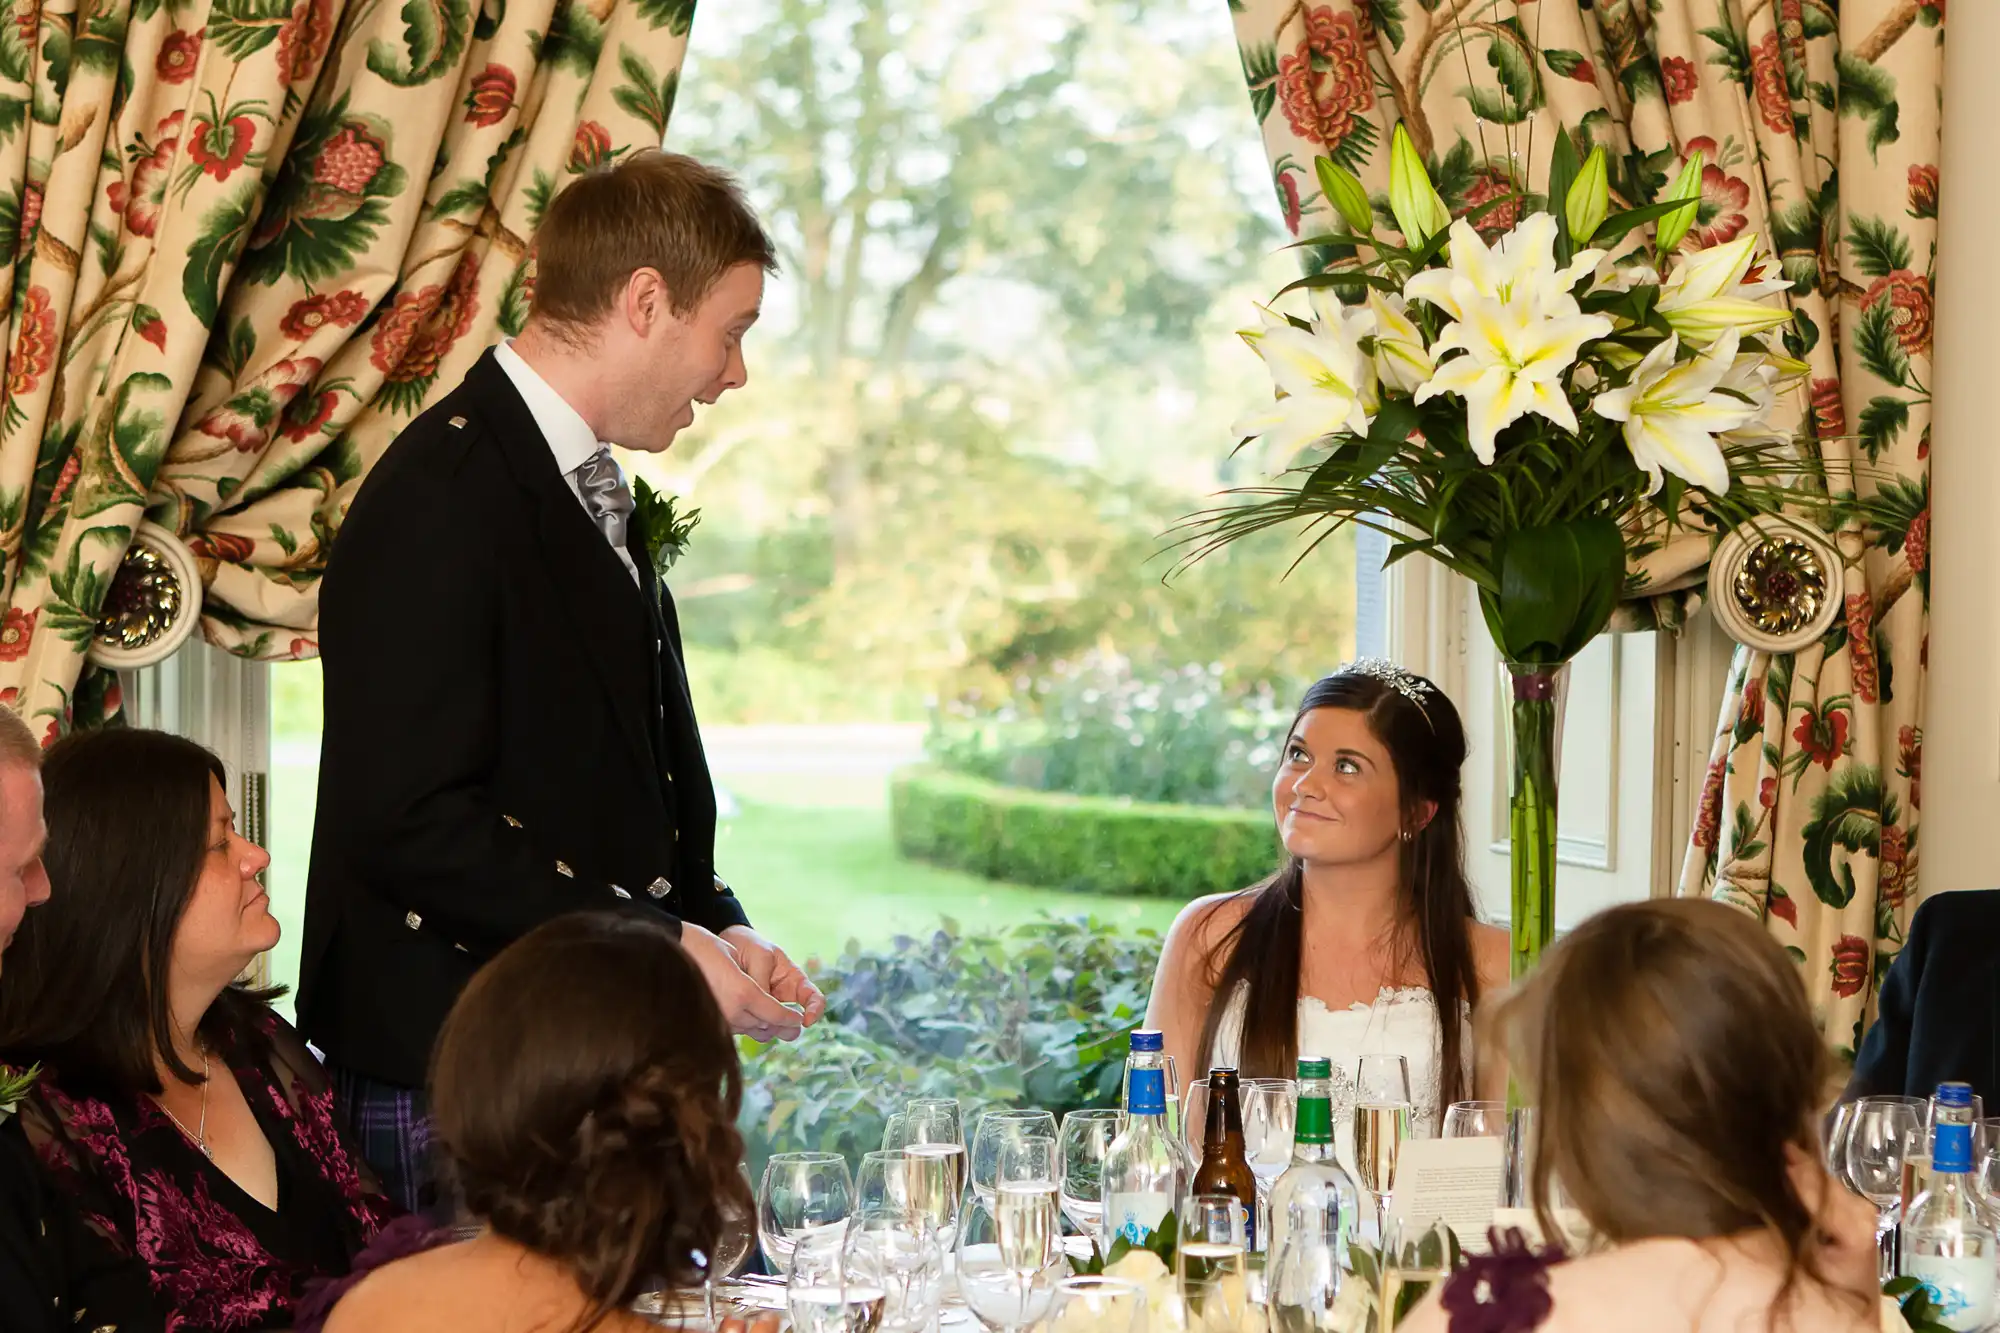 A man in a suit speaks to a woman in a white dress and headband at a wedding reception, with guests around a table and large lilies in the background.